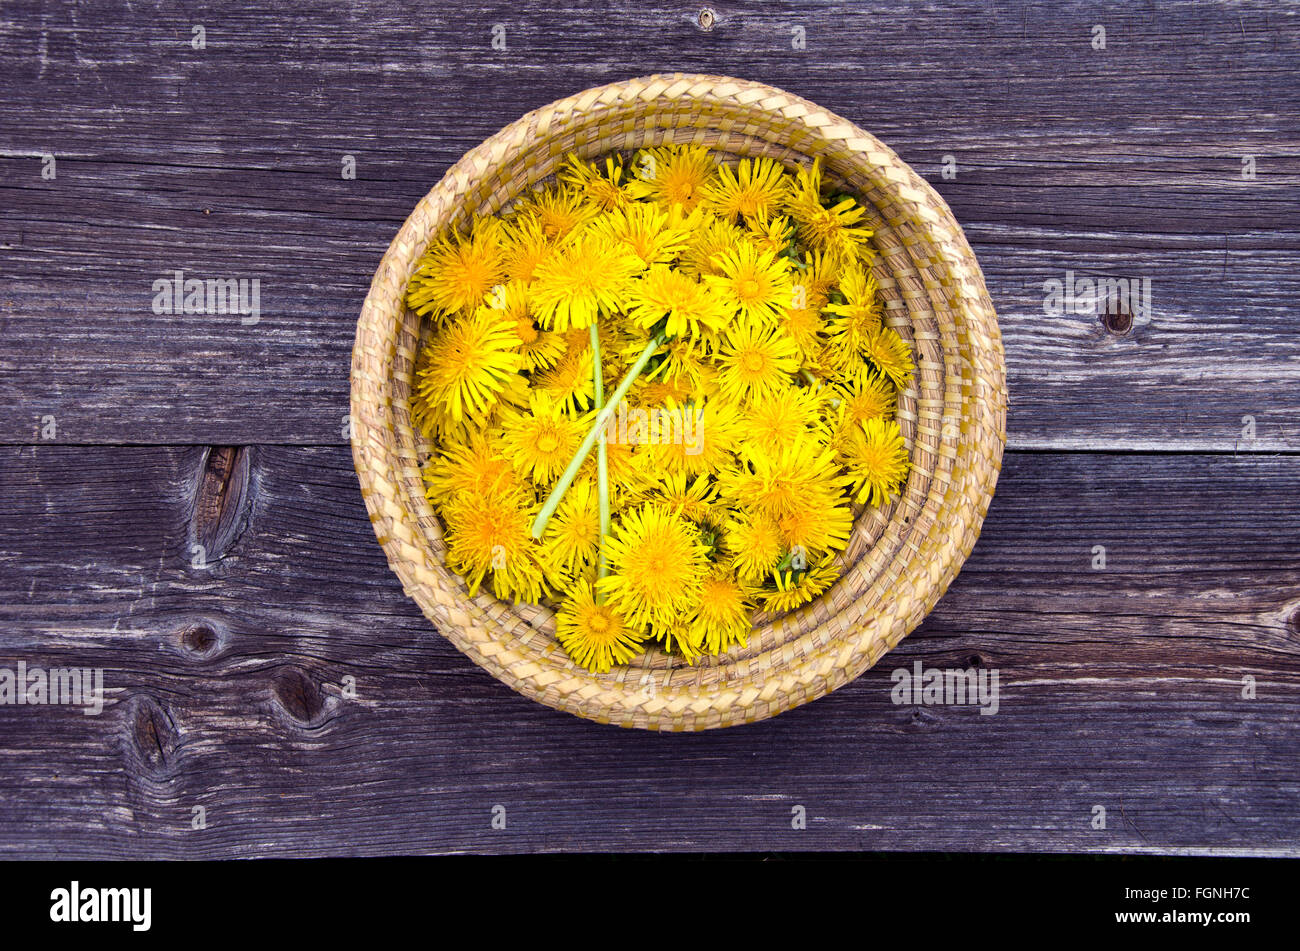 Yellow flowering freshly picked dandelion blossoms in wicker basket on wooden rustic surface Stock Photo